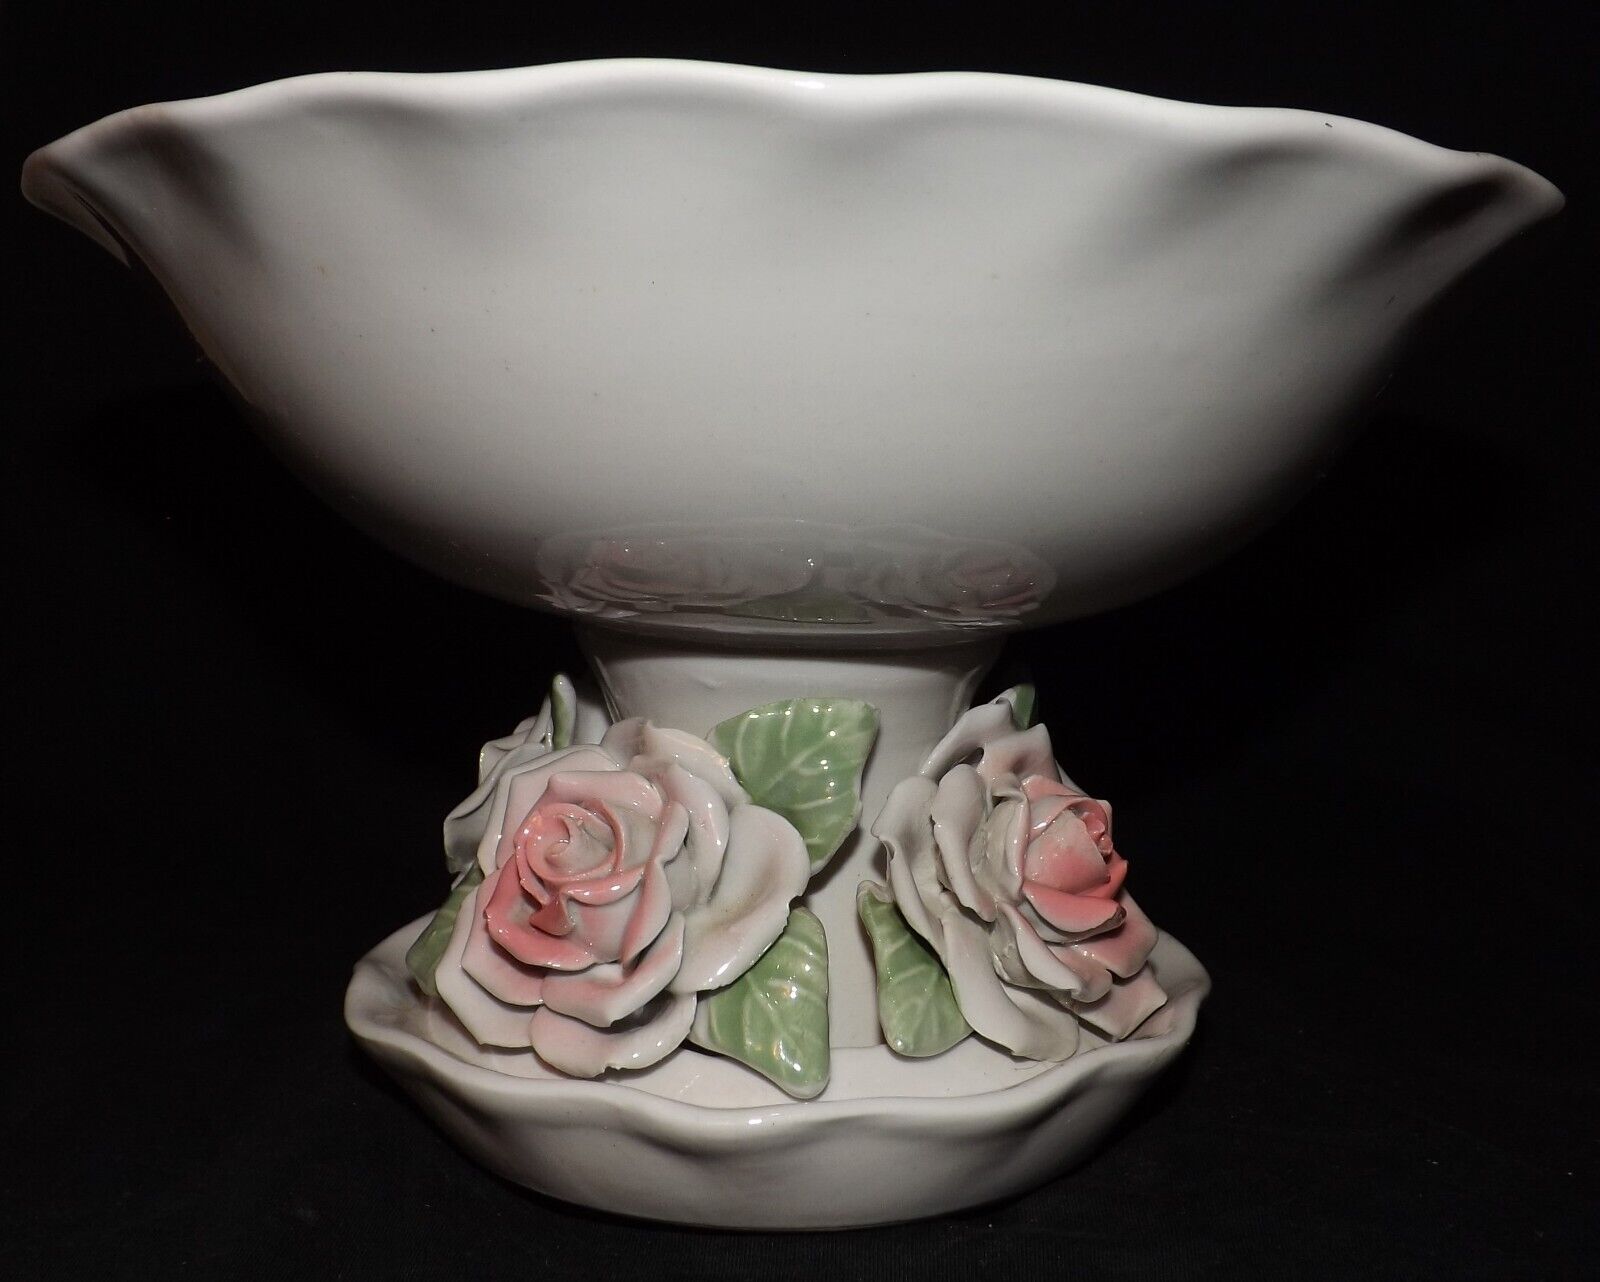 Decorative centerpiece Scalloped edge bowl white w/ornate pink and green flowers